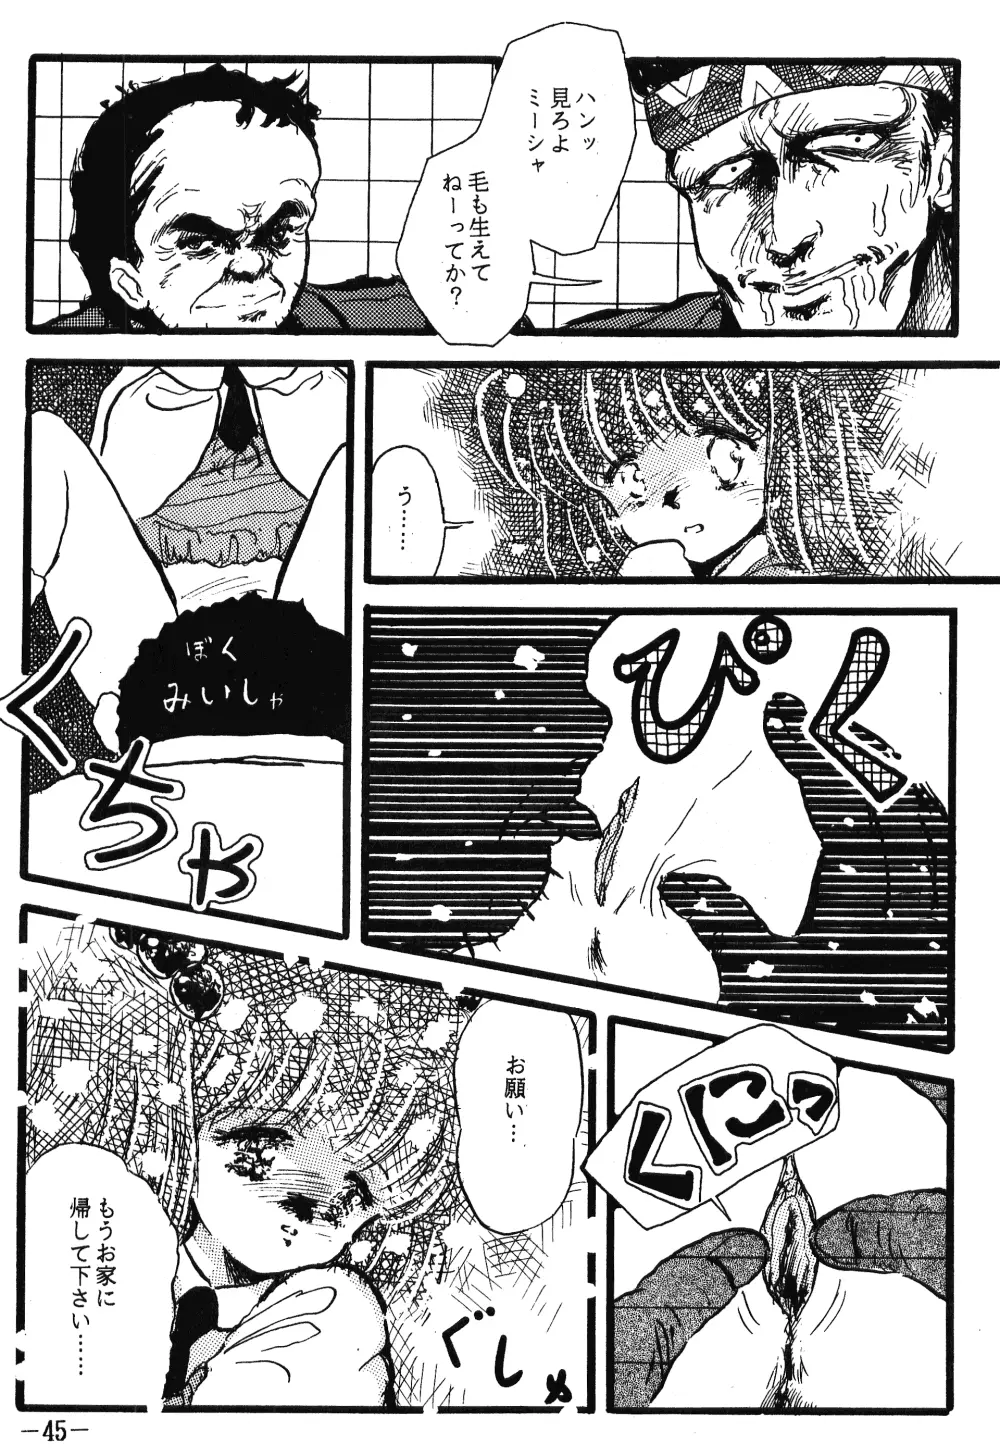 Fro2 Fight Vol. 1 Page.45